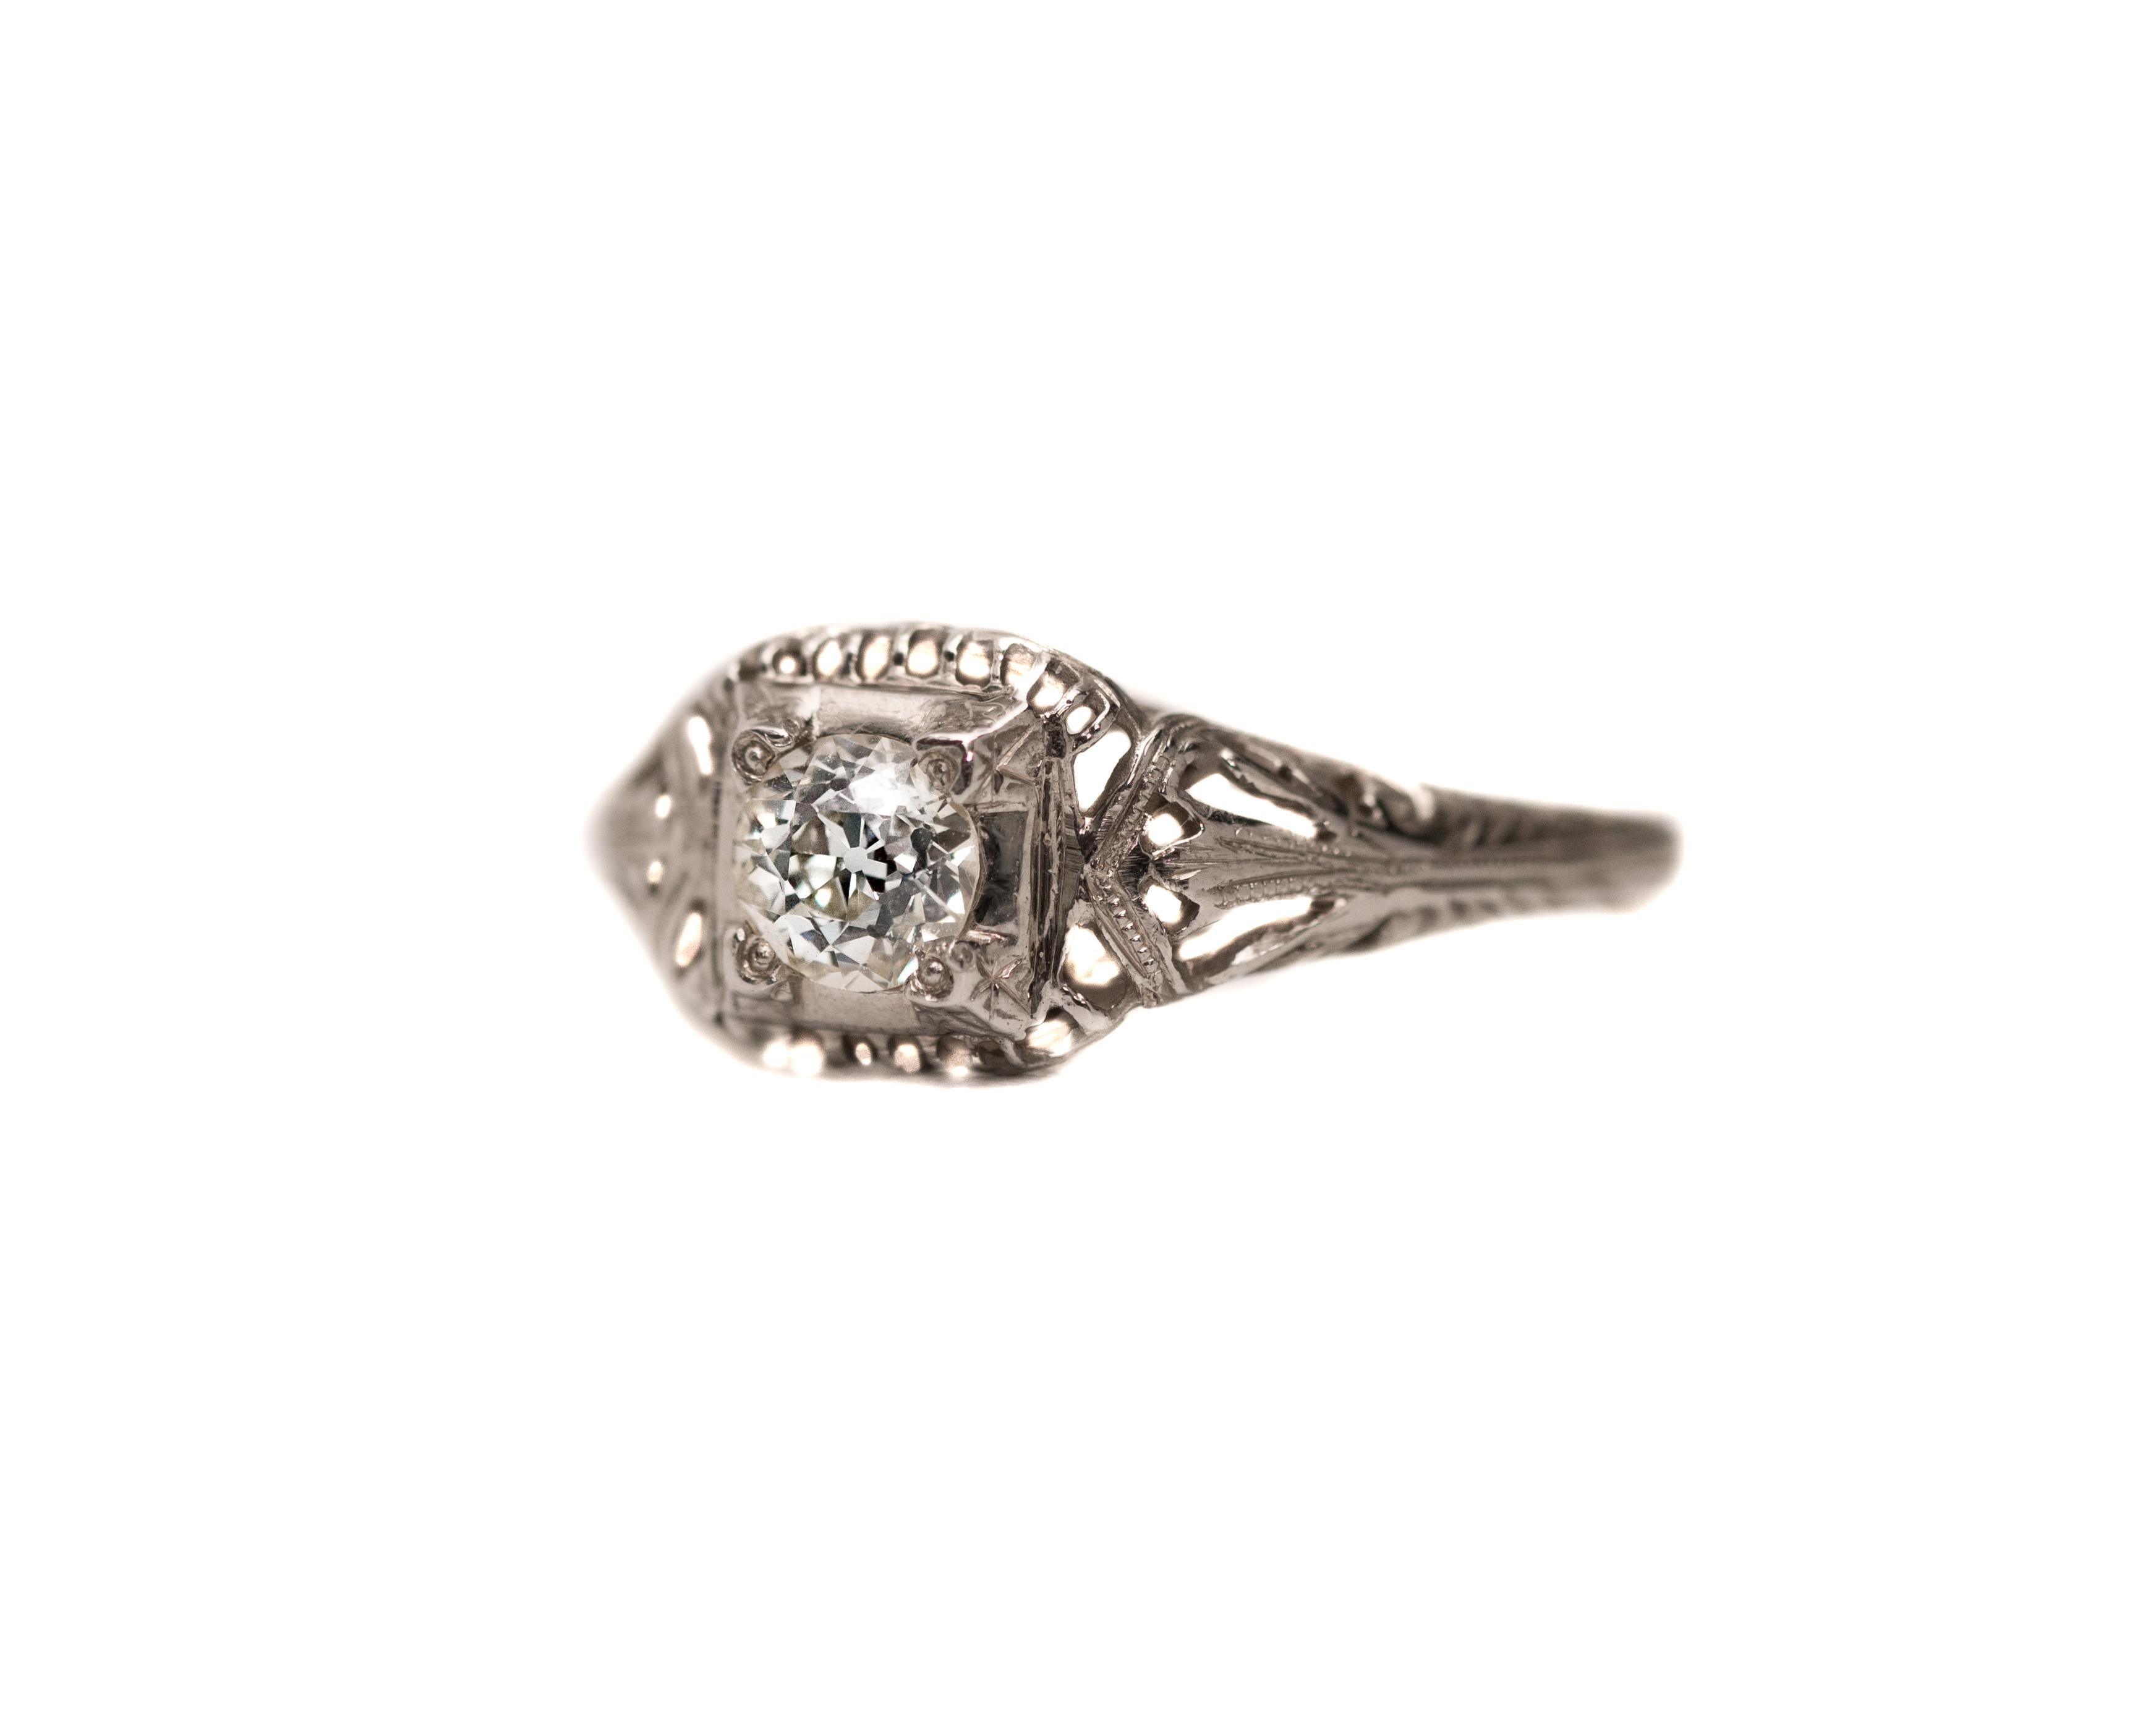 Introducing Lucy
Cute, fun, and flirty. Lucy is a little cutie who’s sure to steal your ❤️. With ribbons in her hair and a sparkle in her eye it’s impossible not to smile looking at the adorable 1940s diamond filigree ring.

Diamond